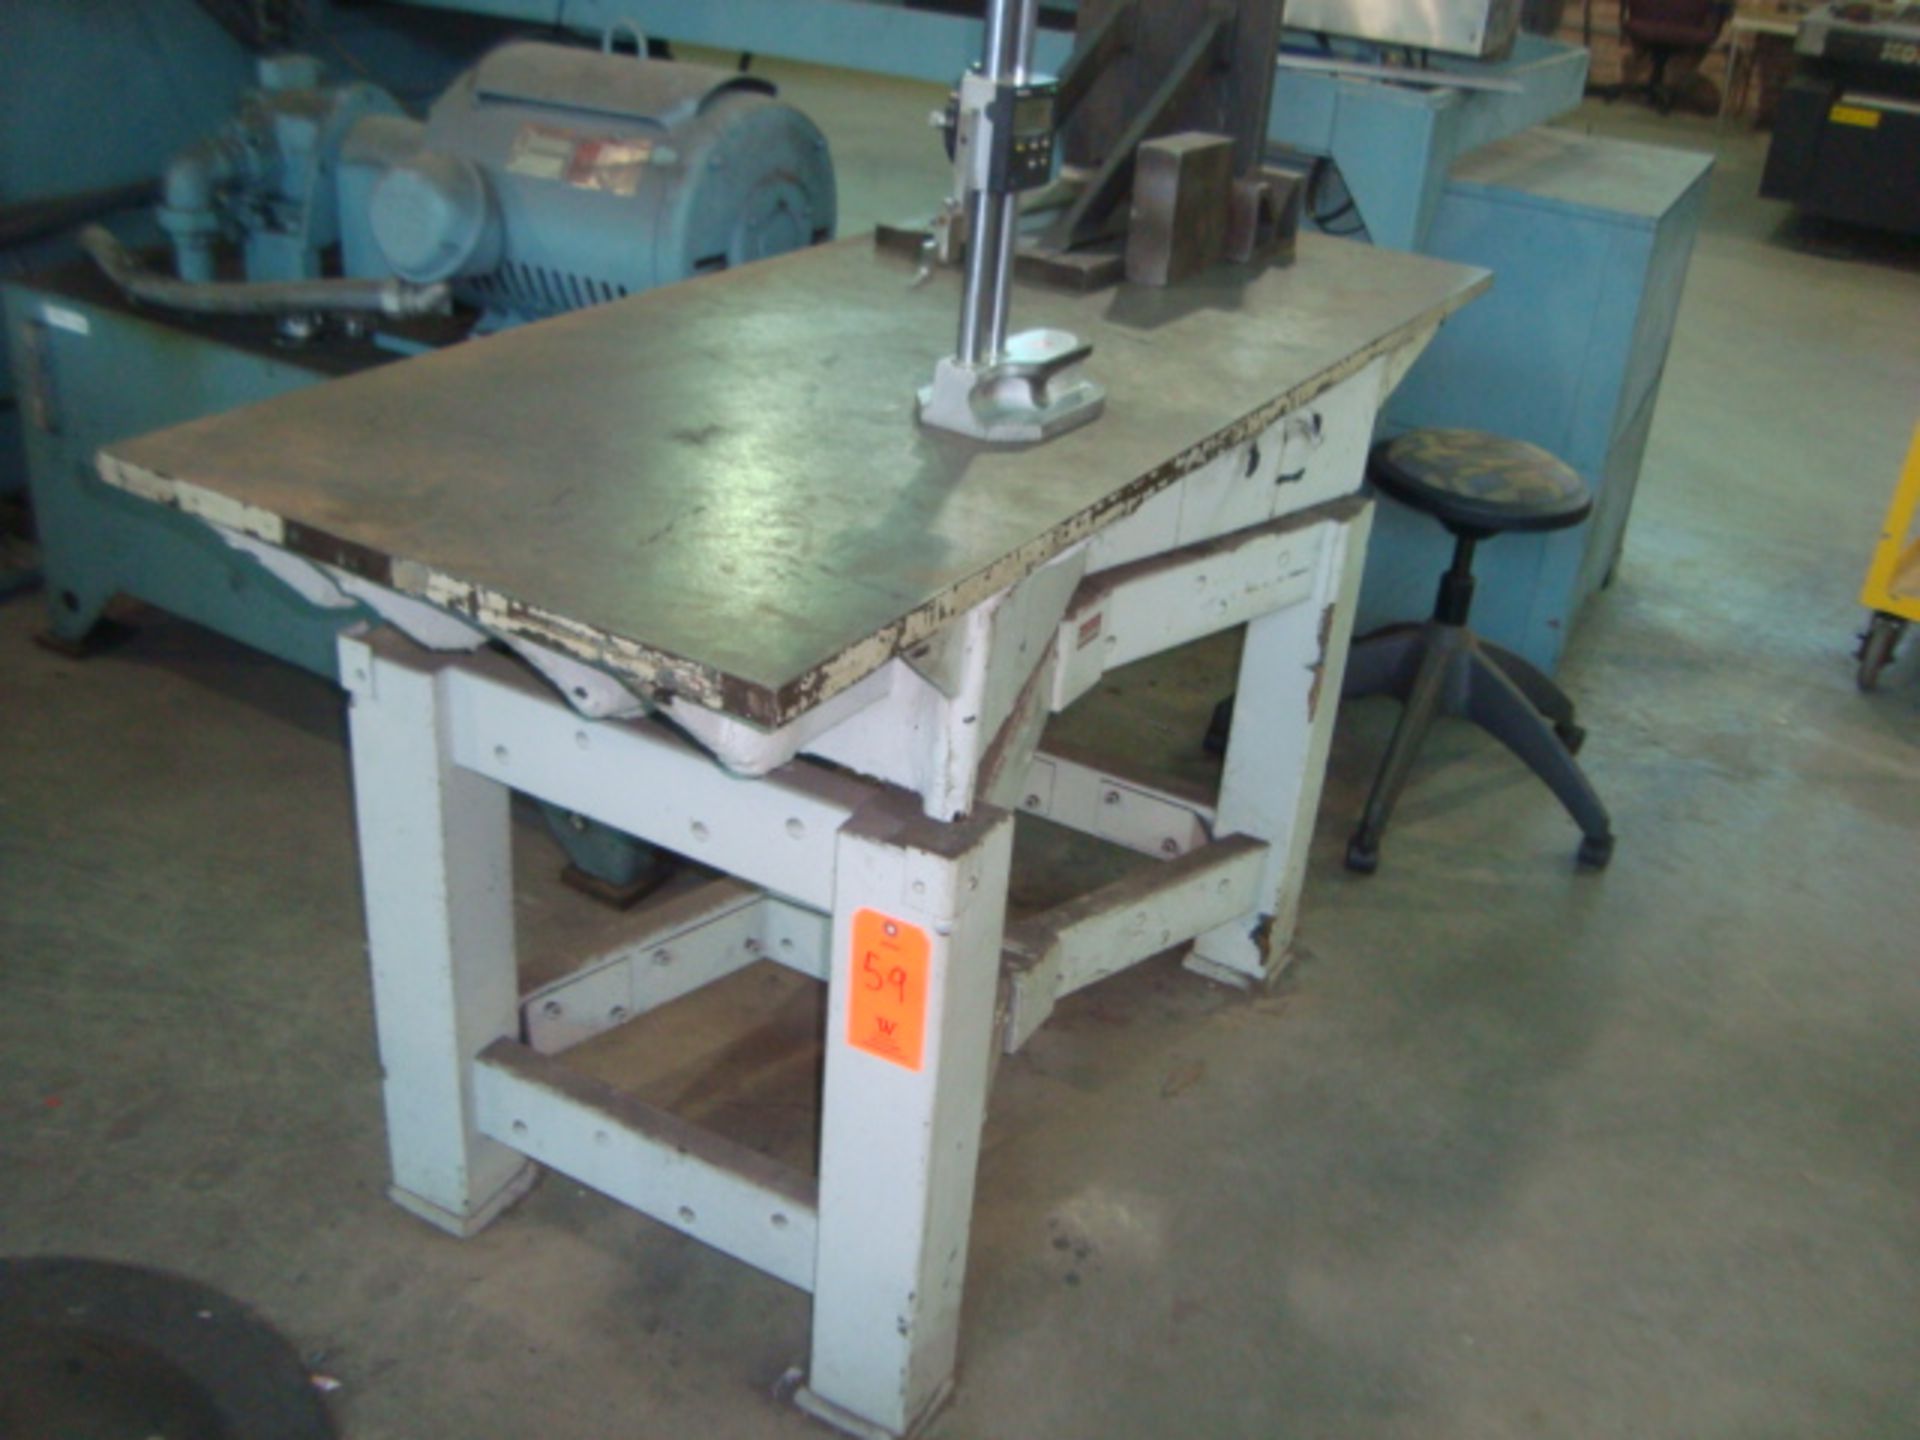 Precision Steel Surface Table, 5' ft. x 2' ft. x 1" in. Thickness x 33.5" in. Tall. Contents On - Image 2 of 4